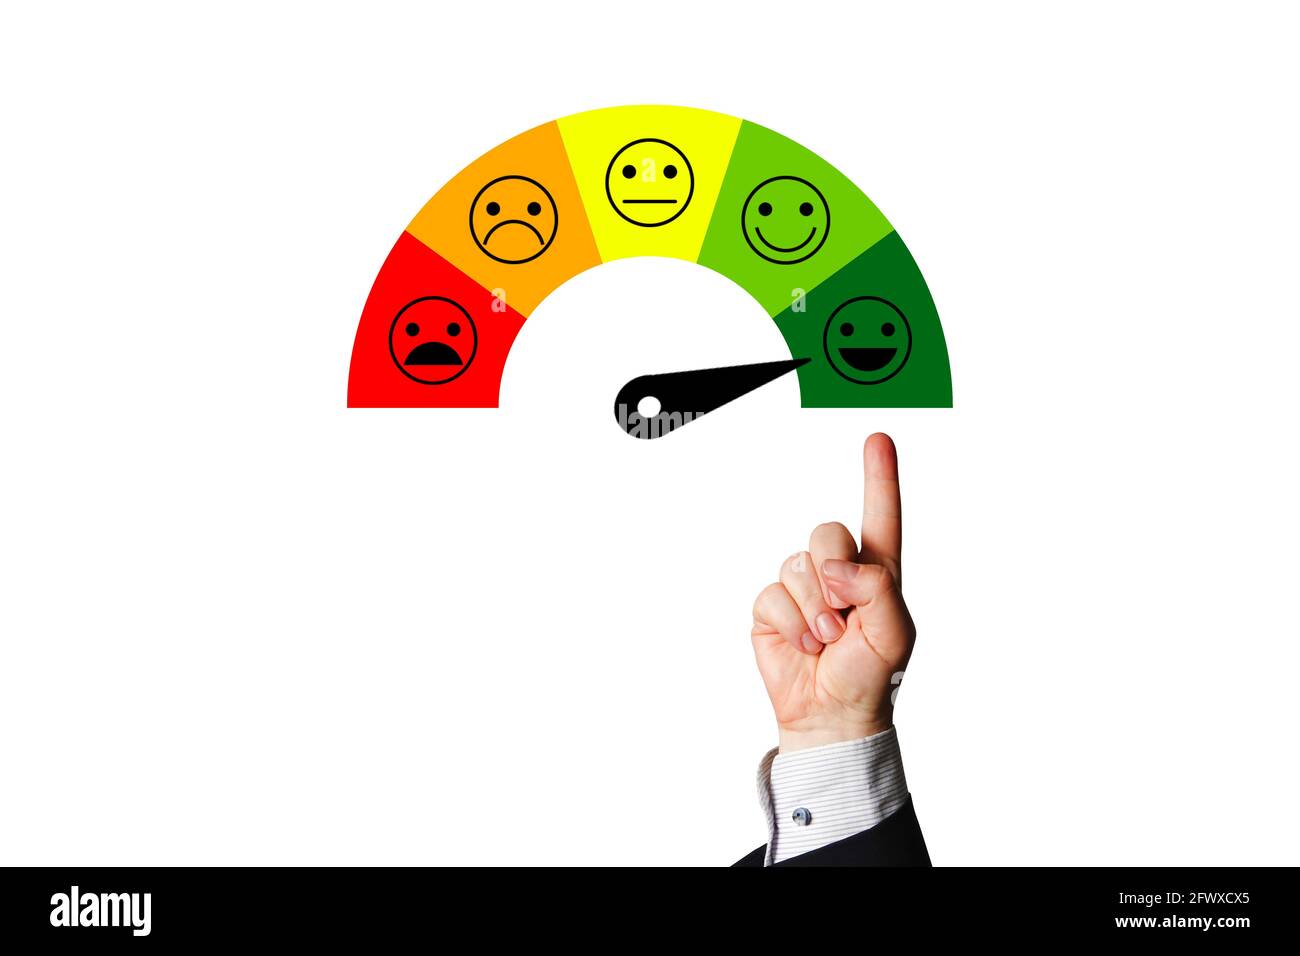 Customer, employee or project stakeholder satisfaction on maximum. Satisfaction concept. Stock Photo